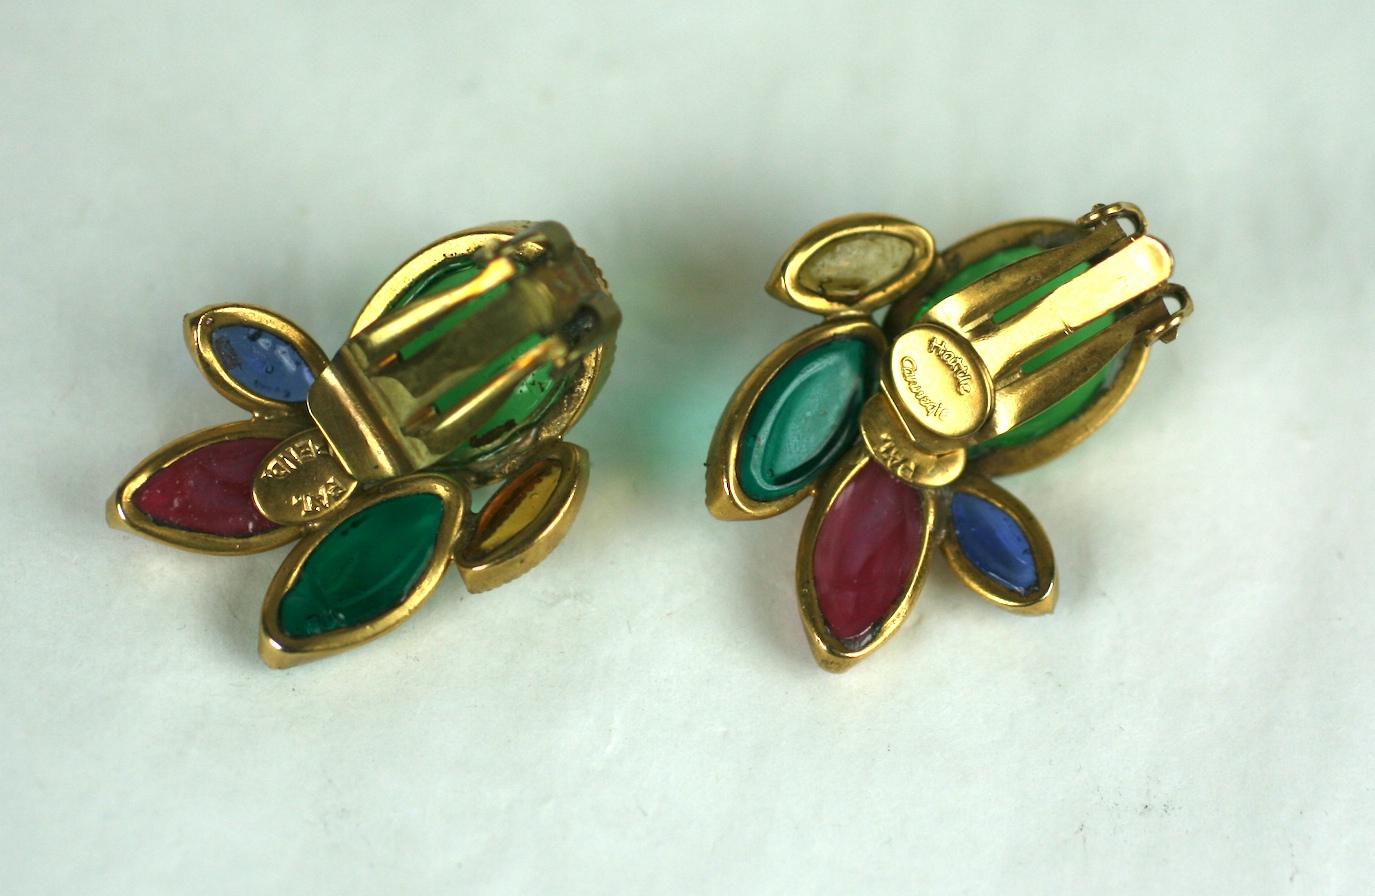  Maison Gripoix for Hattie Carnegie Poured Glass Earrings In Excellent Condition For Sale In New York, NY